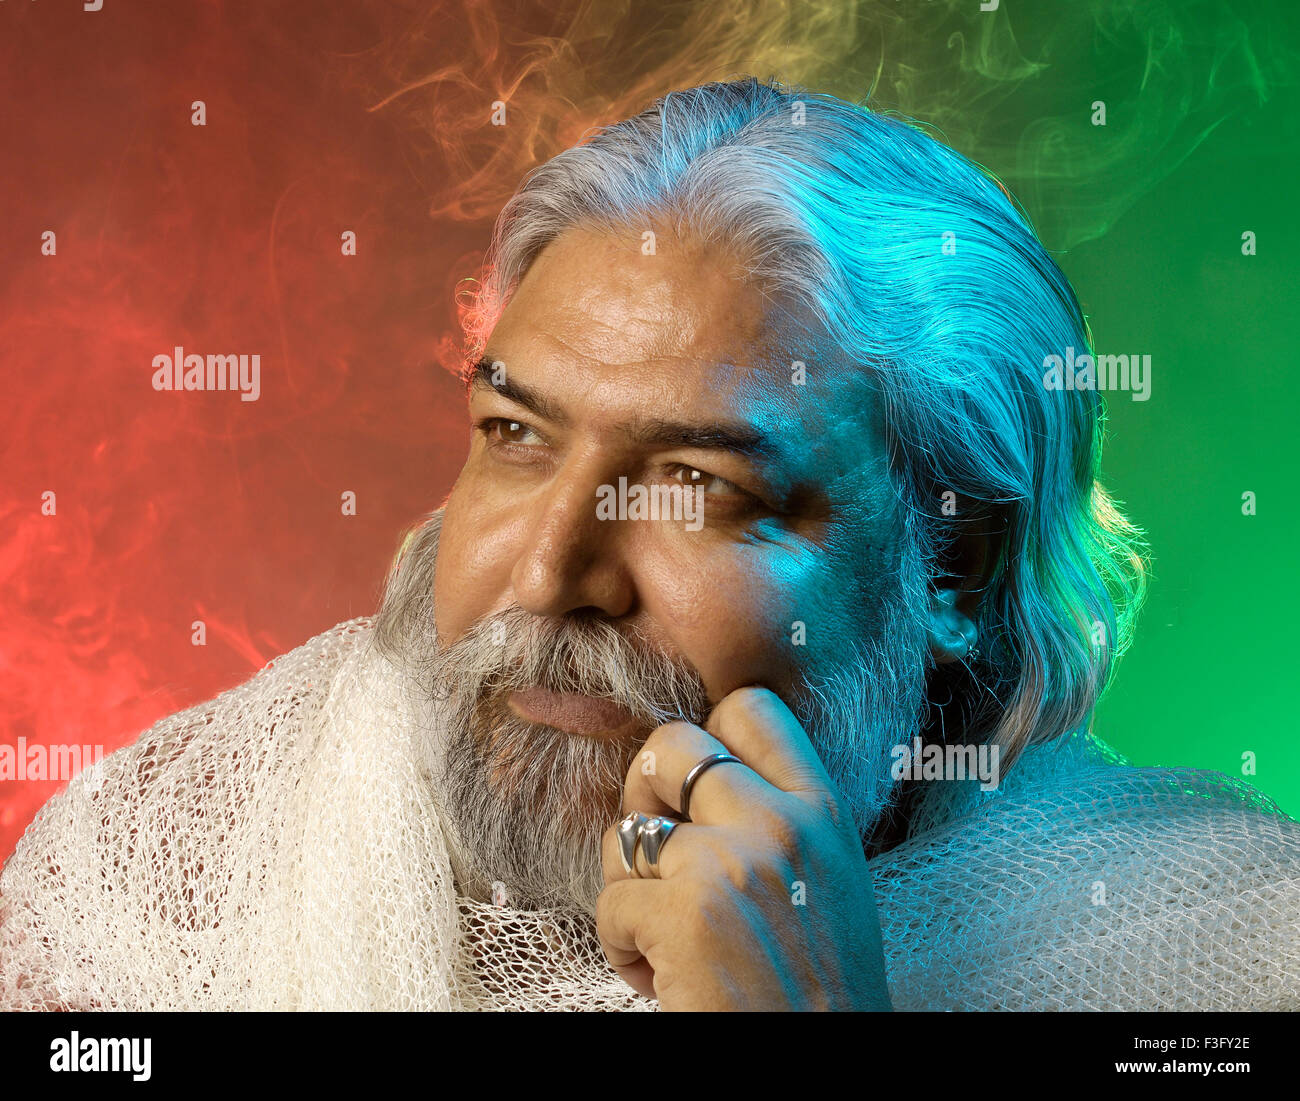 Hindu priest experts in vastu shastra a science of placement ; India ; MR Stock Photo